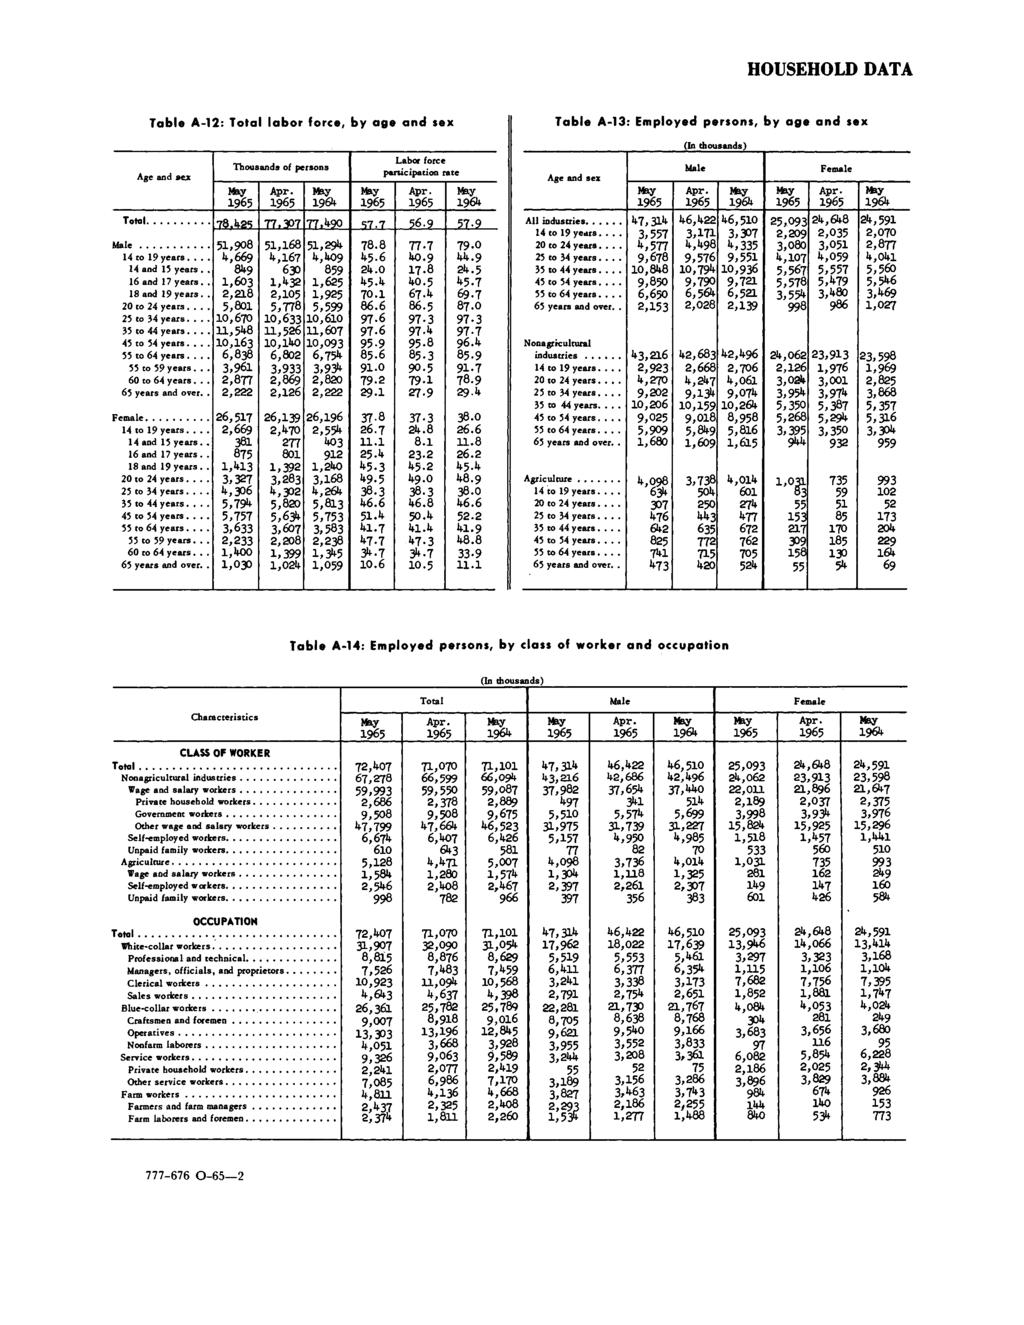 HOUSEHOLD DATA Table A-12: labor force, by age and sex Table A-13: Employed persons, by age and sex Age and sex Male 14 to 19 years.... 14 and 15 years.. 16 and 17 years.. 18 and 19 years.